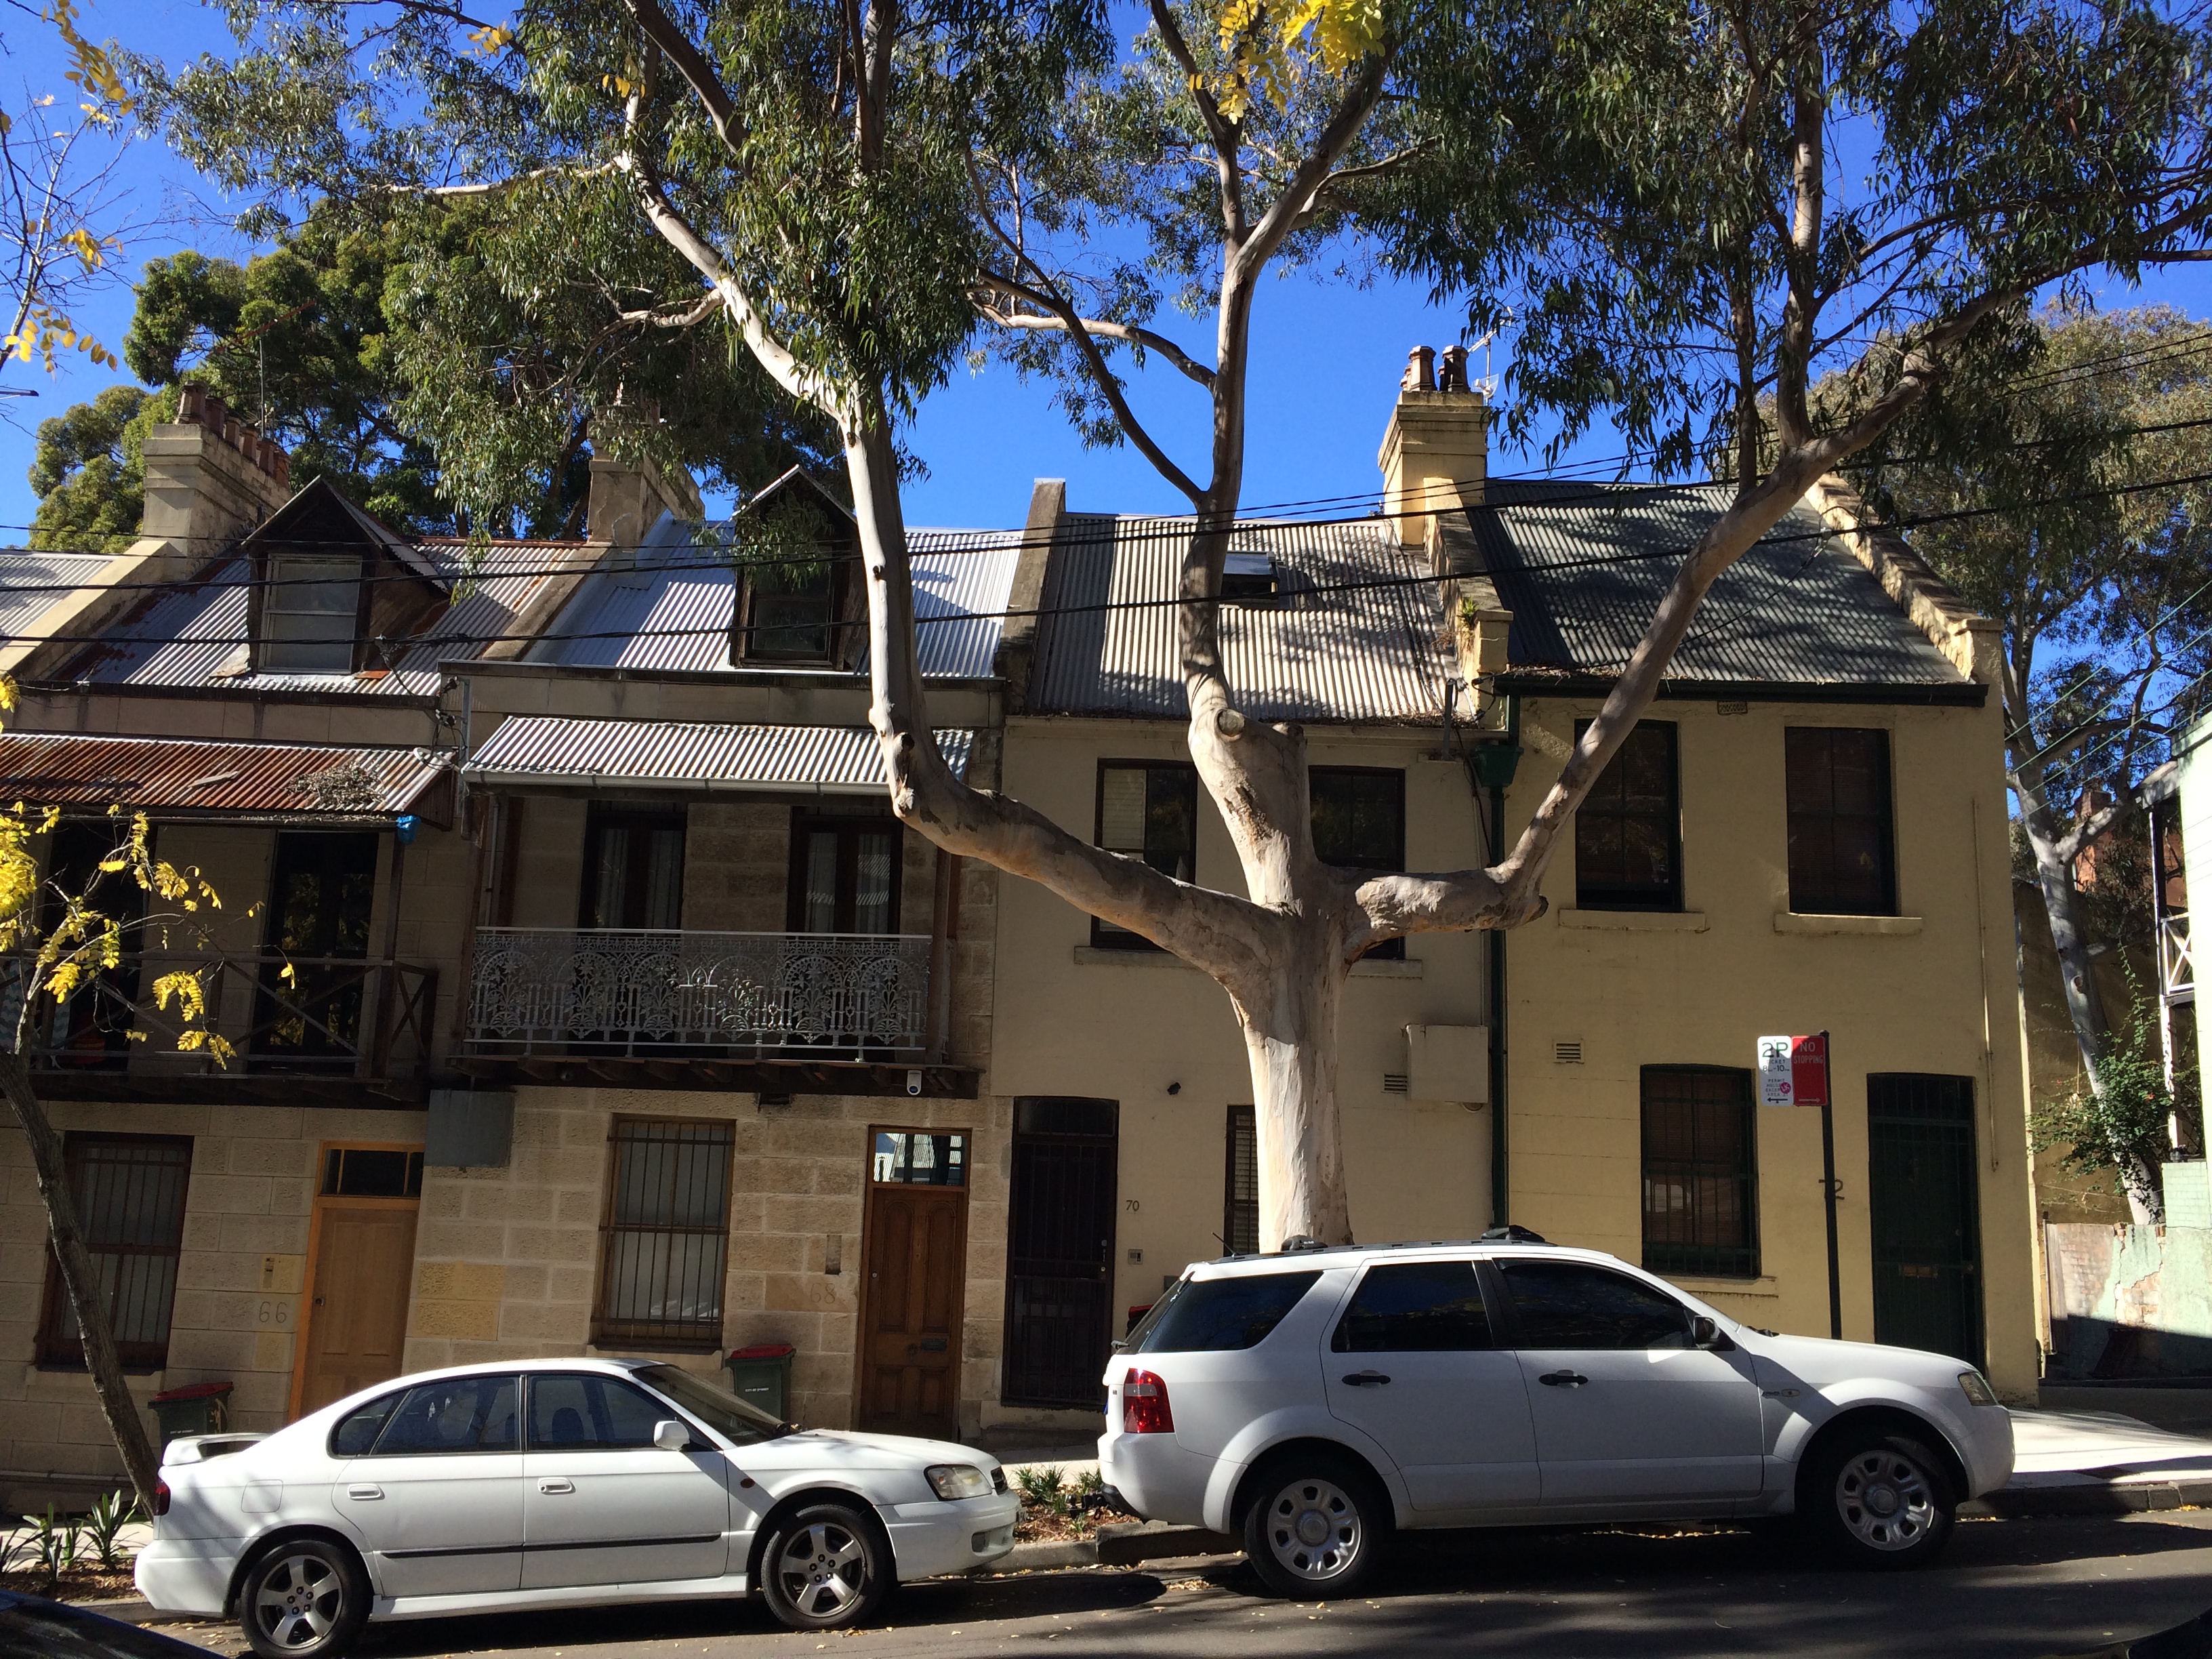 Love the terrace houses in Sydney